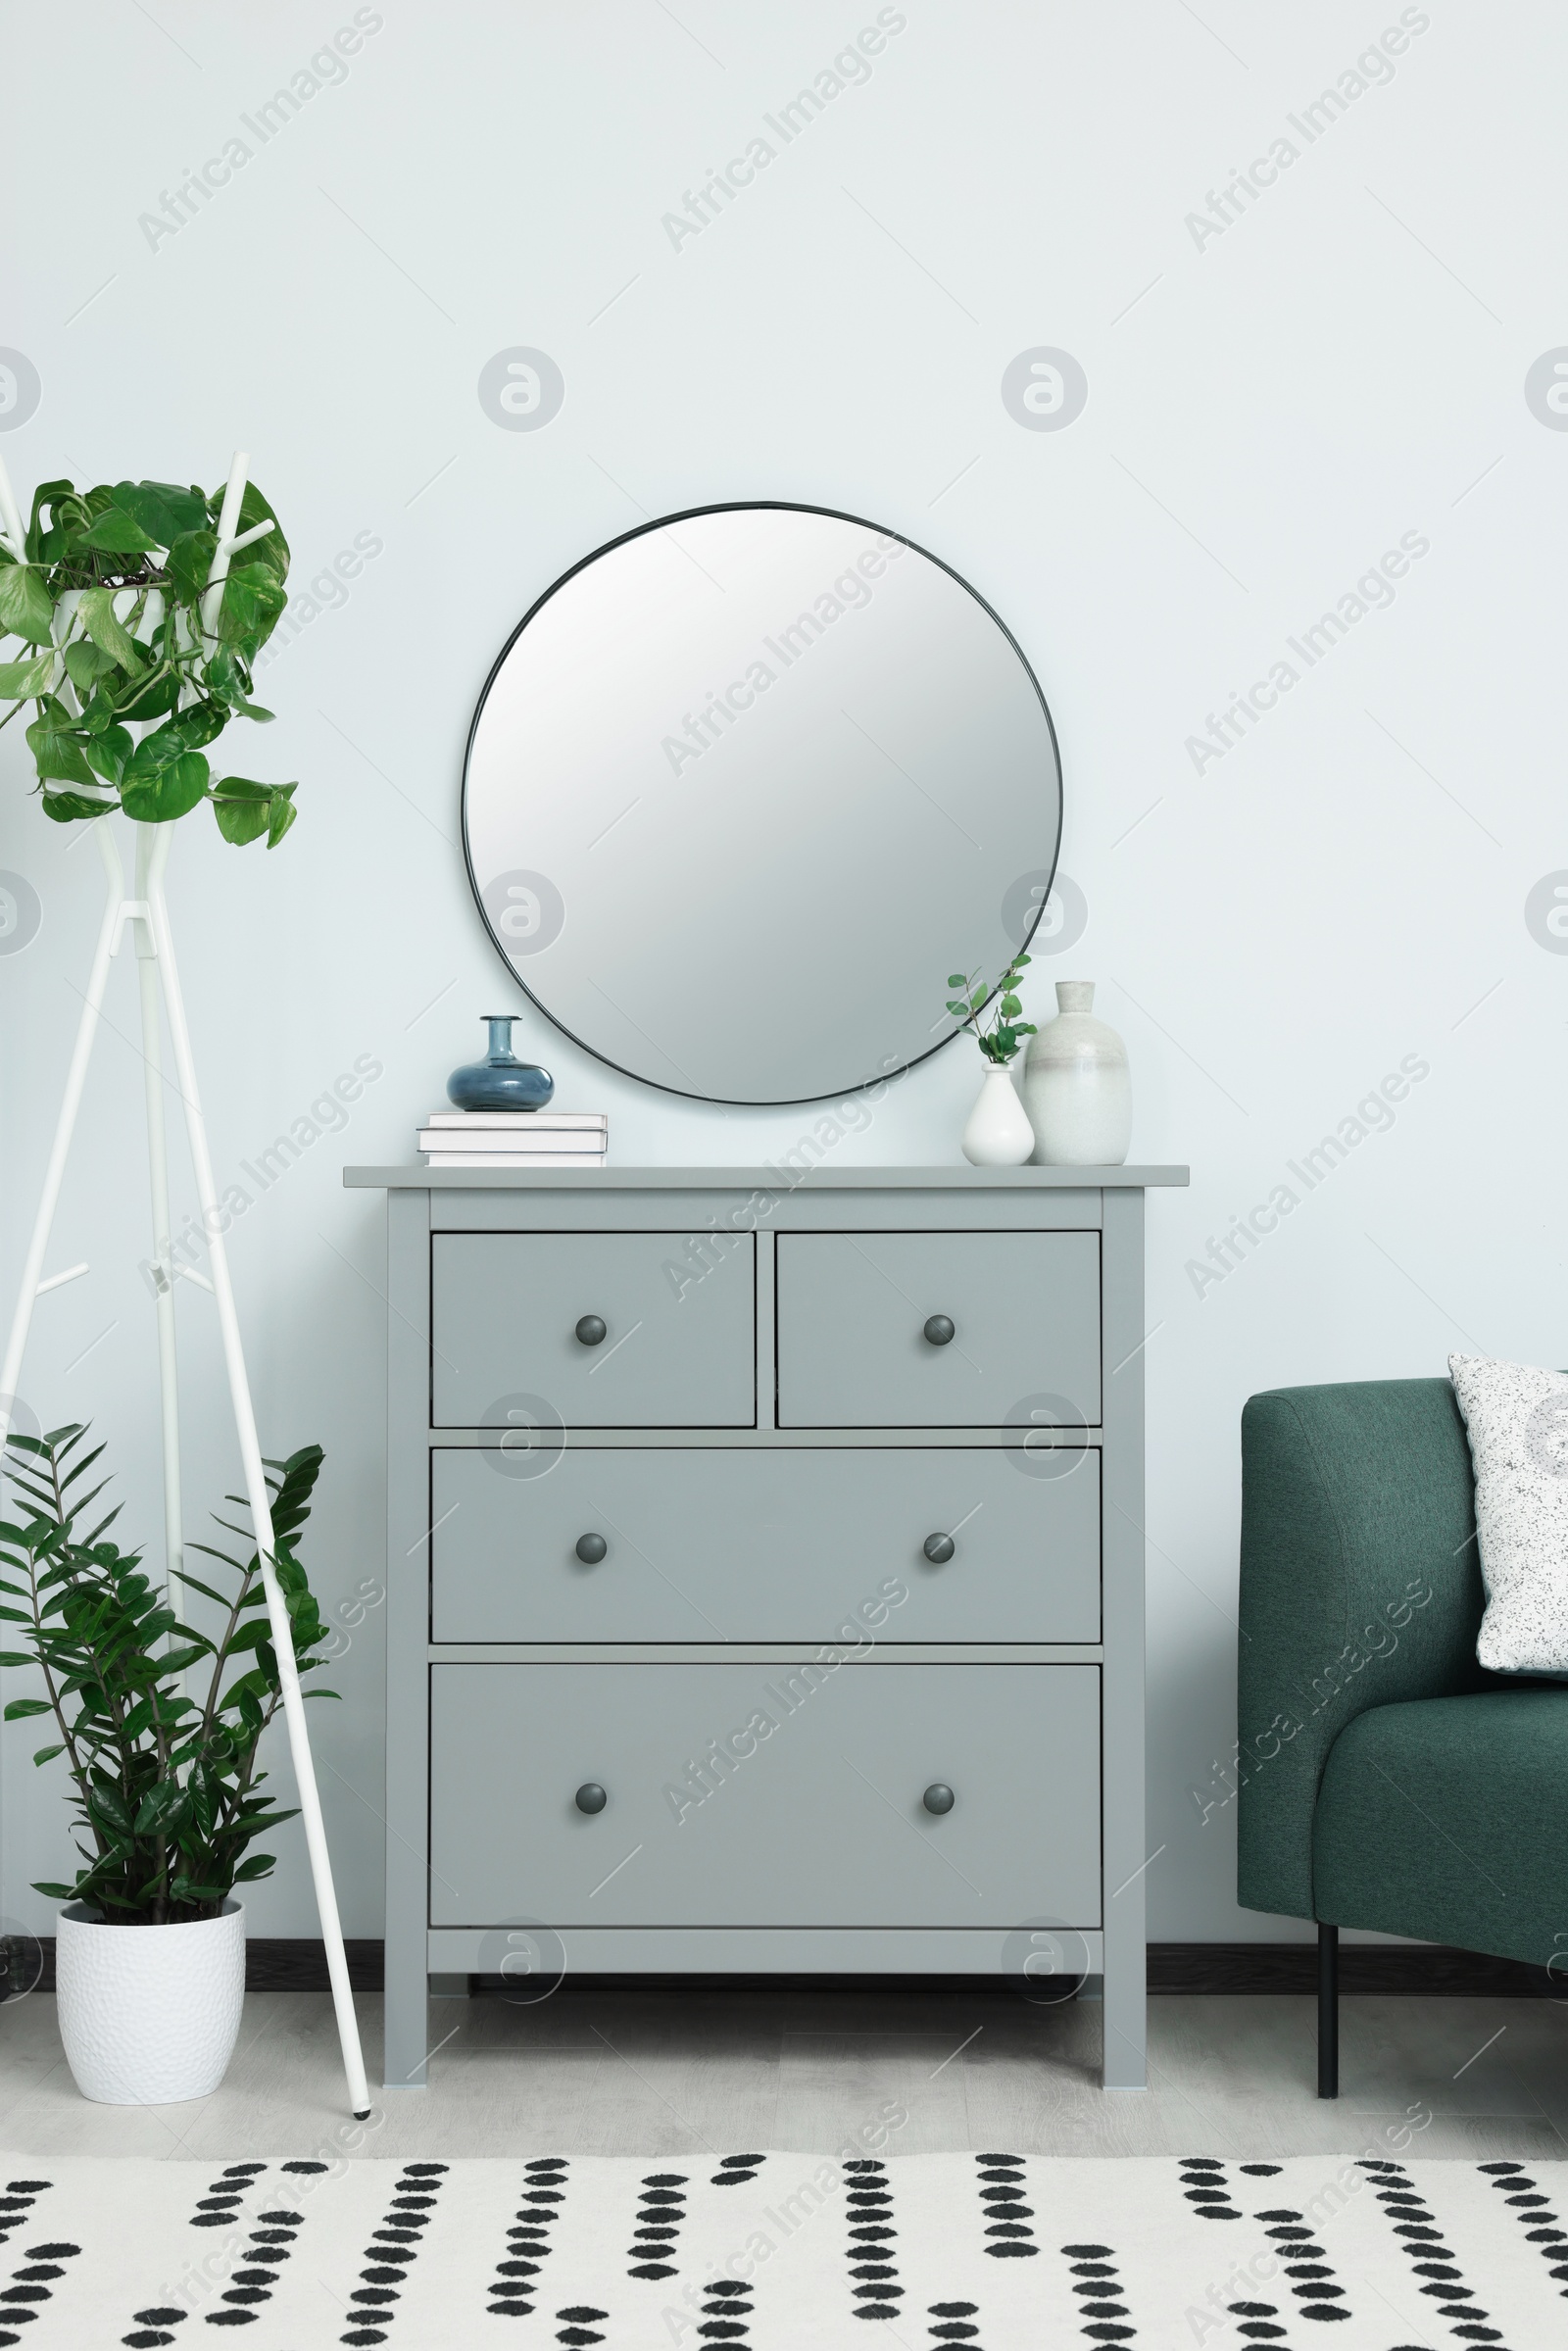 Photo of Chest of drawers and stylish round mirror on white wall indoors. Interior design